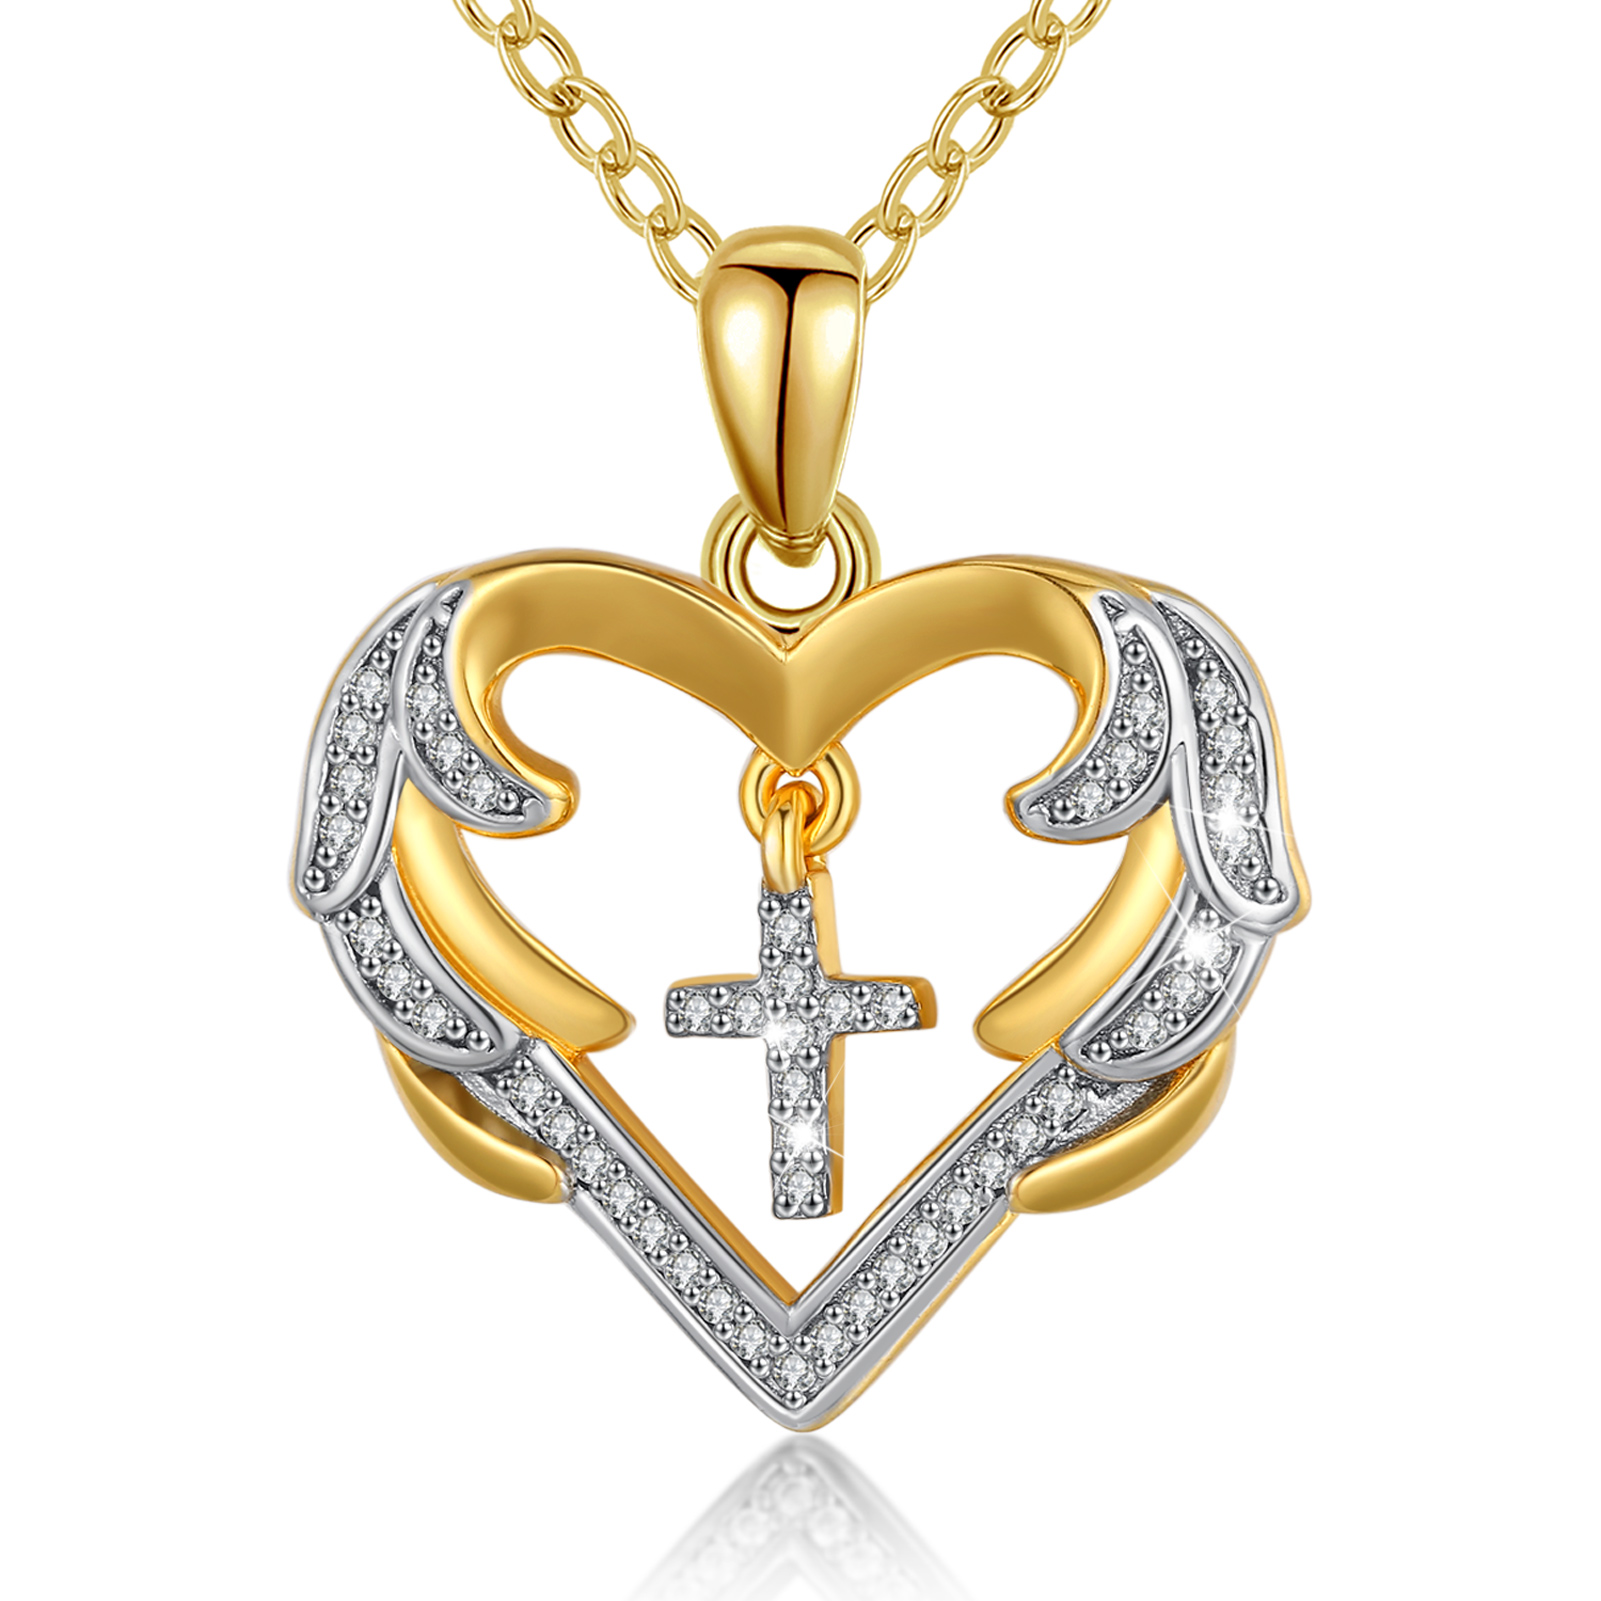 Merryshine Jewelry S925 Sterling Silver Gold Plated Heart Cross Pendant Necklace for Women